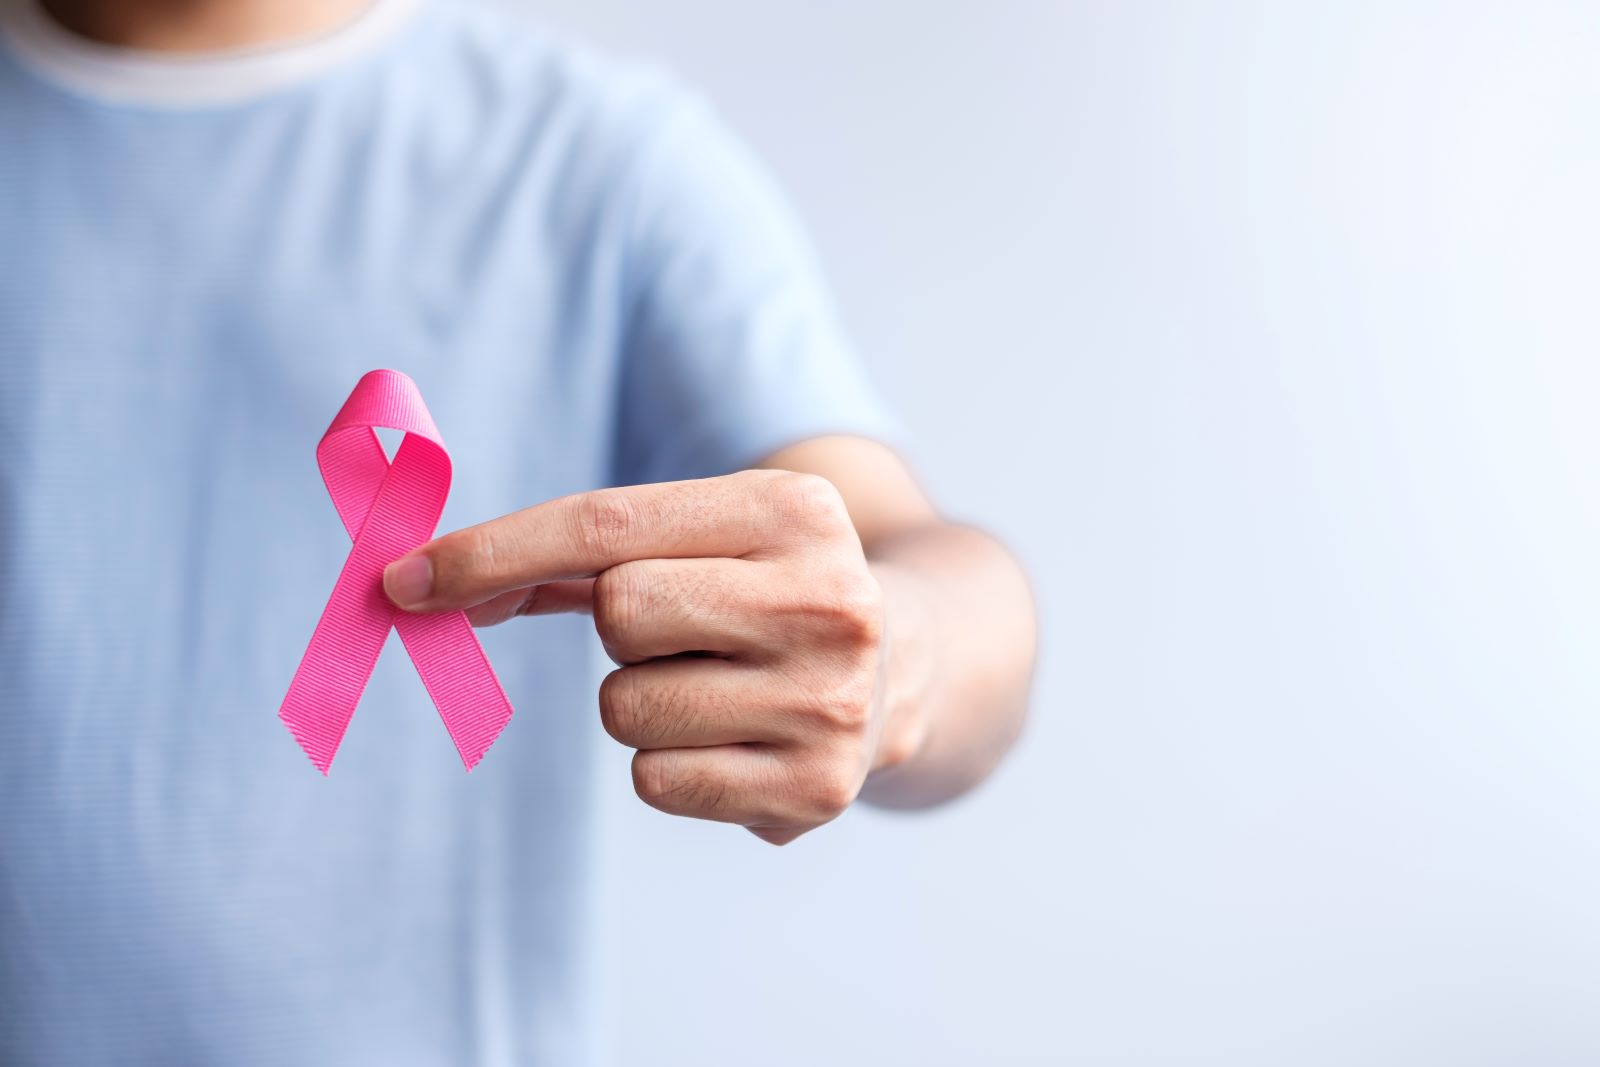 “I Never Heard Him Talk About It:" The Risks and Stigma of Male Breast Cancer